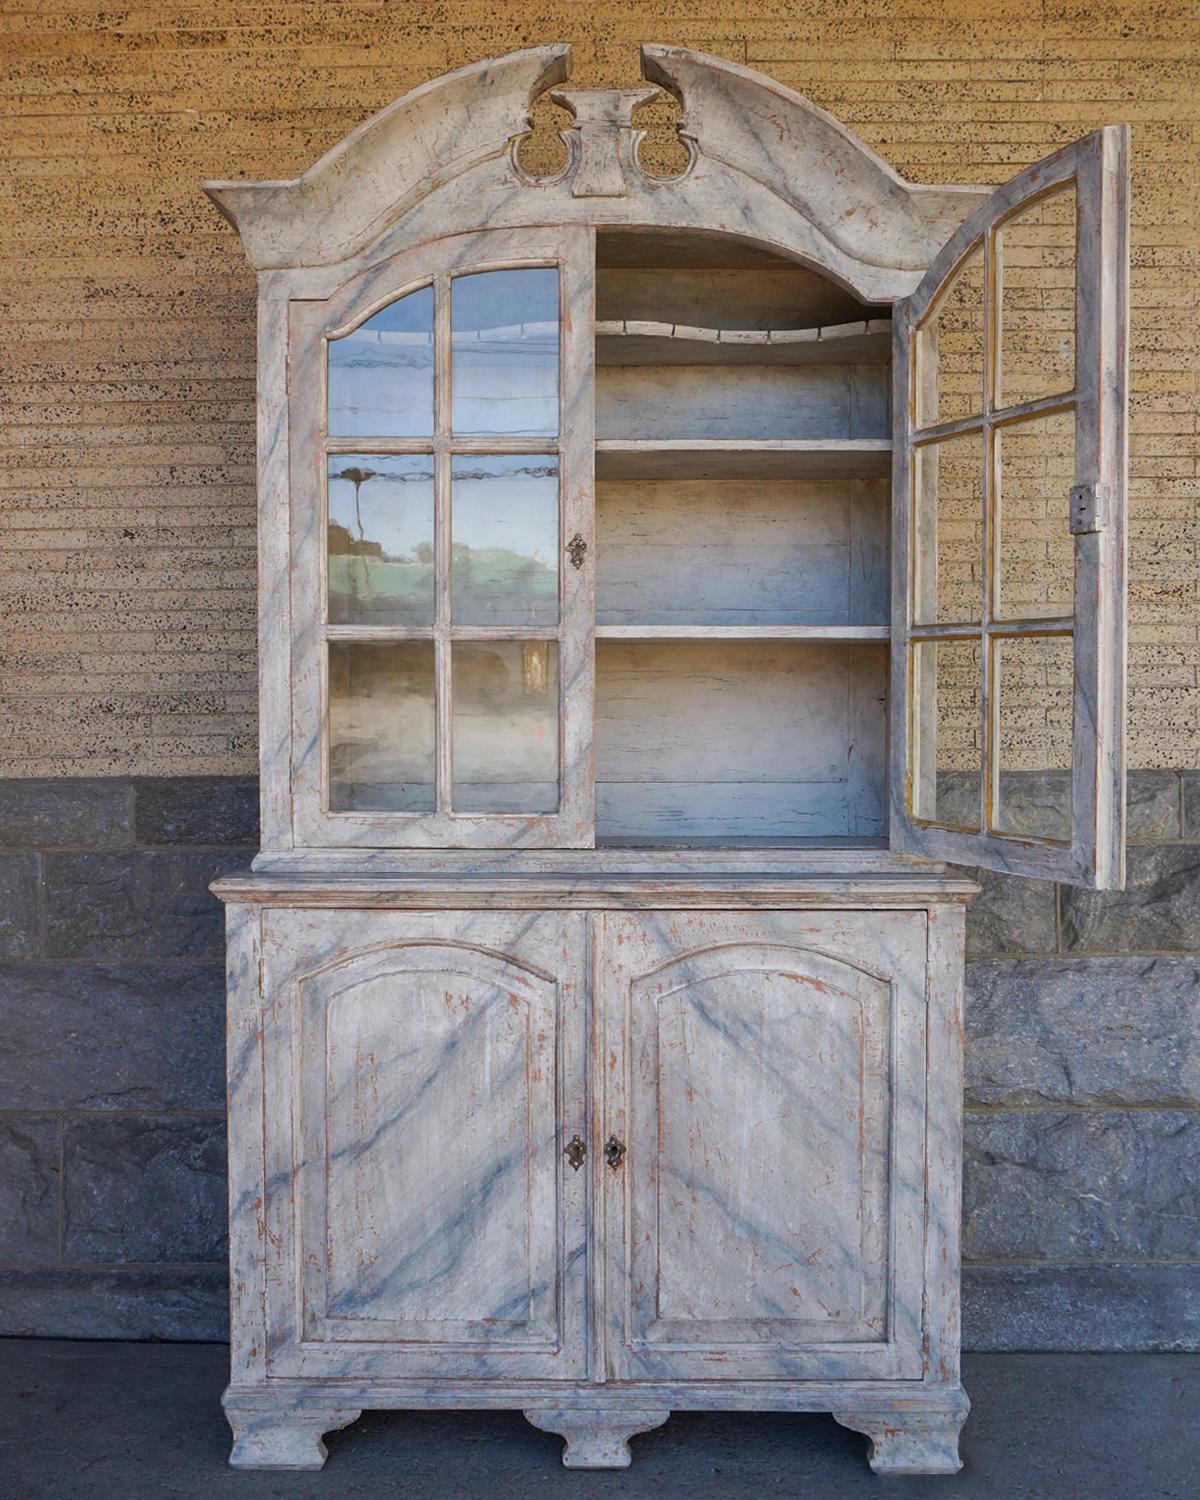 Eighteenth century Swedish cabinet in two parts with overall marbled surface. The upper section has a beautifully carved pediment over a pair of arched doors which retain the original old glass. Inside are three fixed shelves, the uppermost shaped